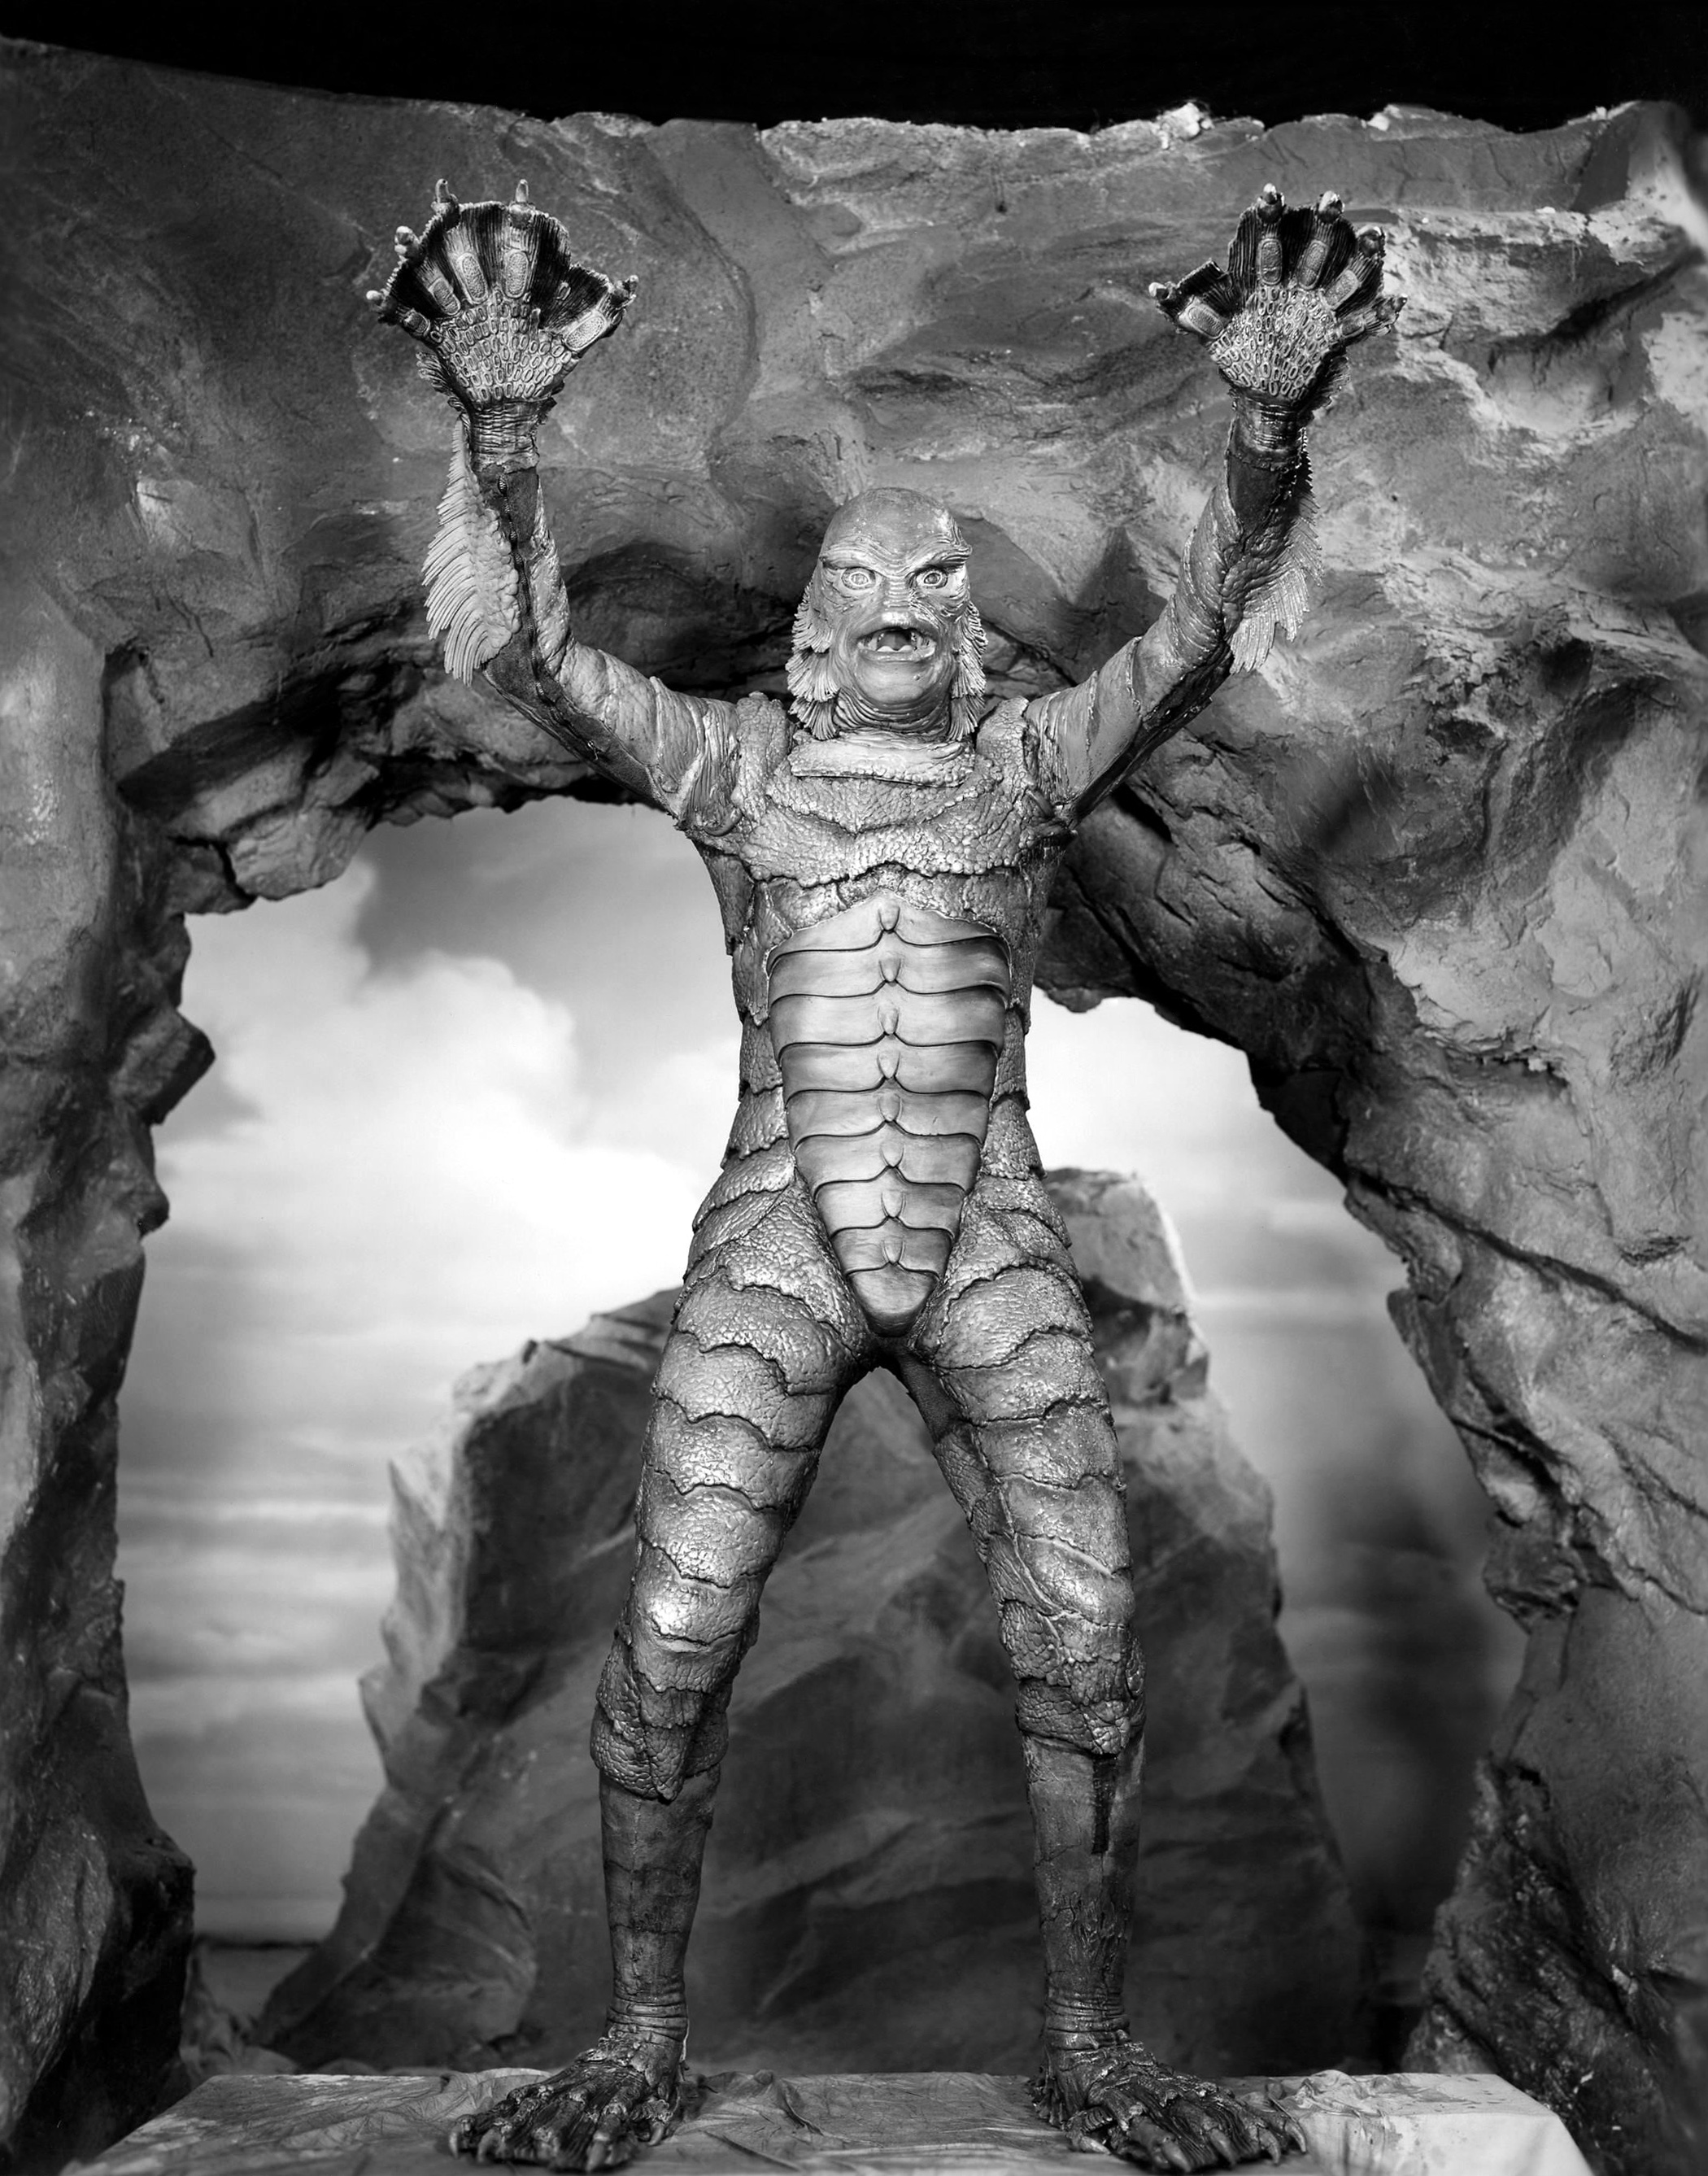 Creature From the Black Lagoon.